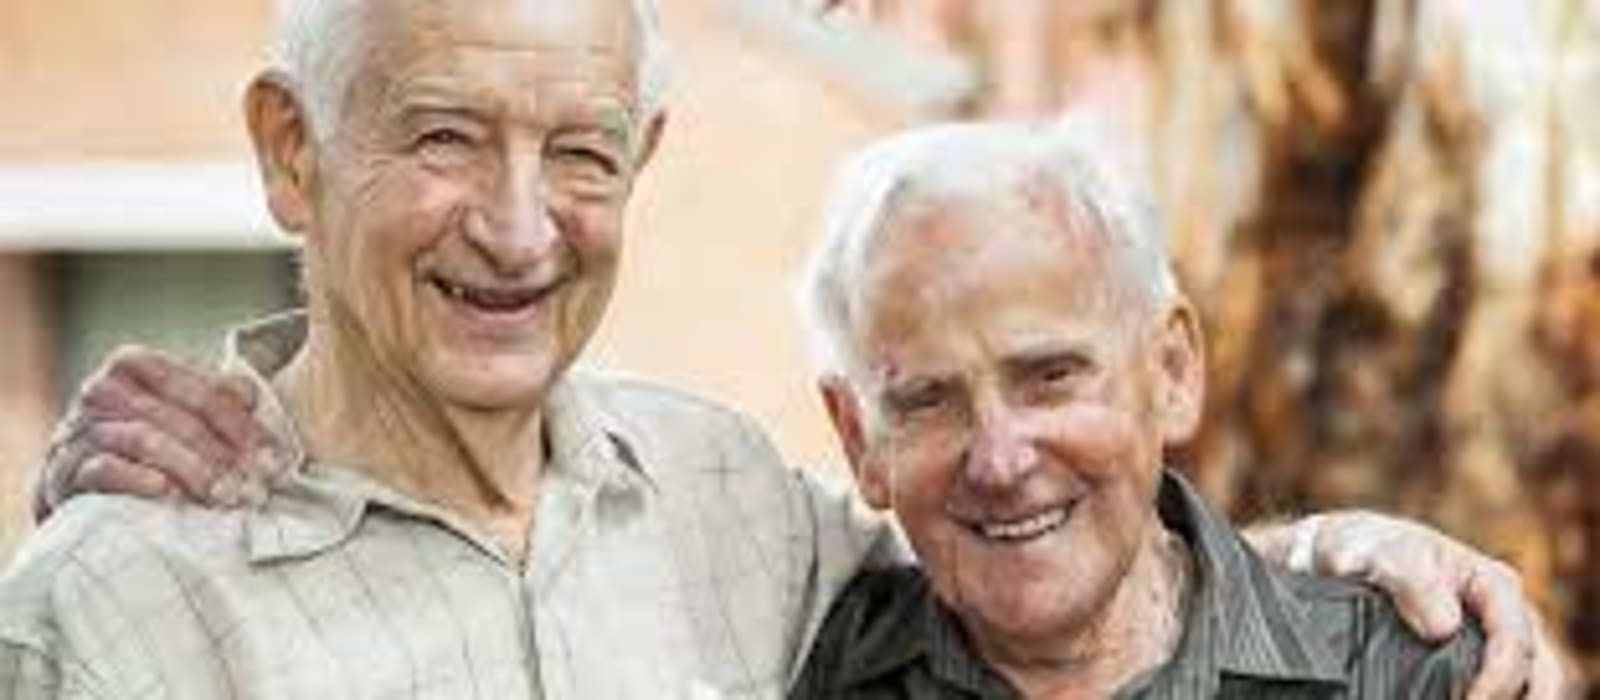 Men Living to 100 and Beyond